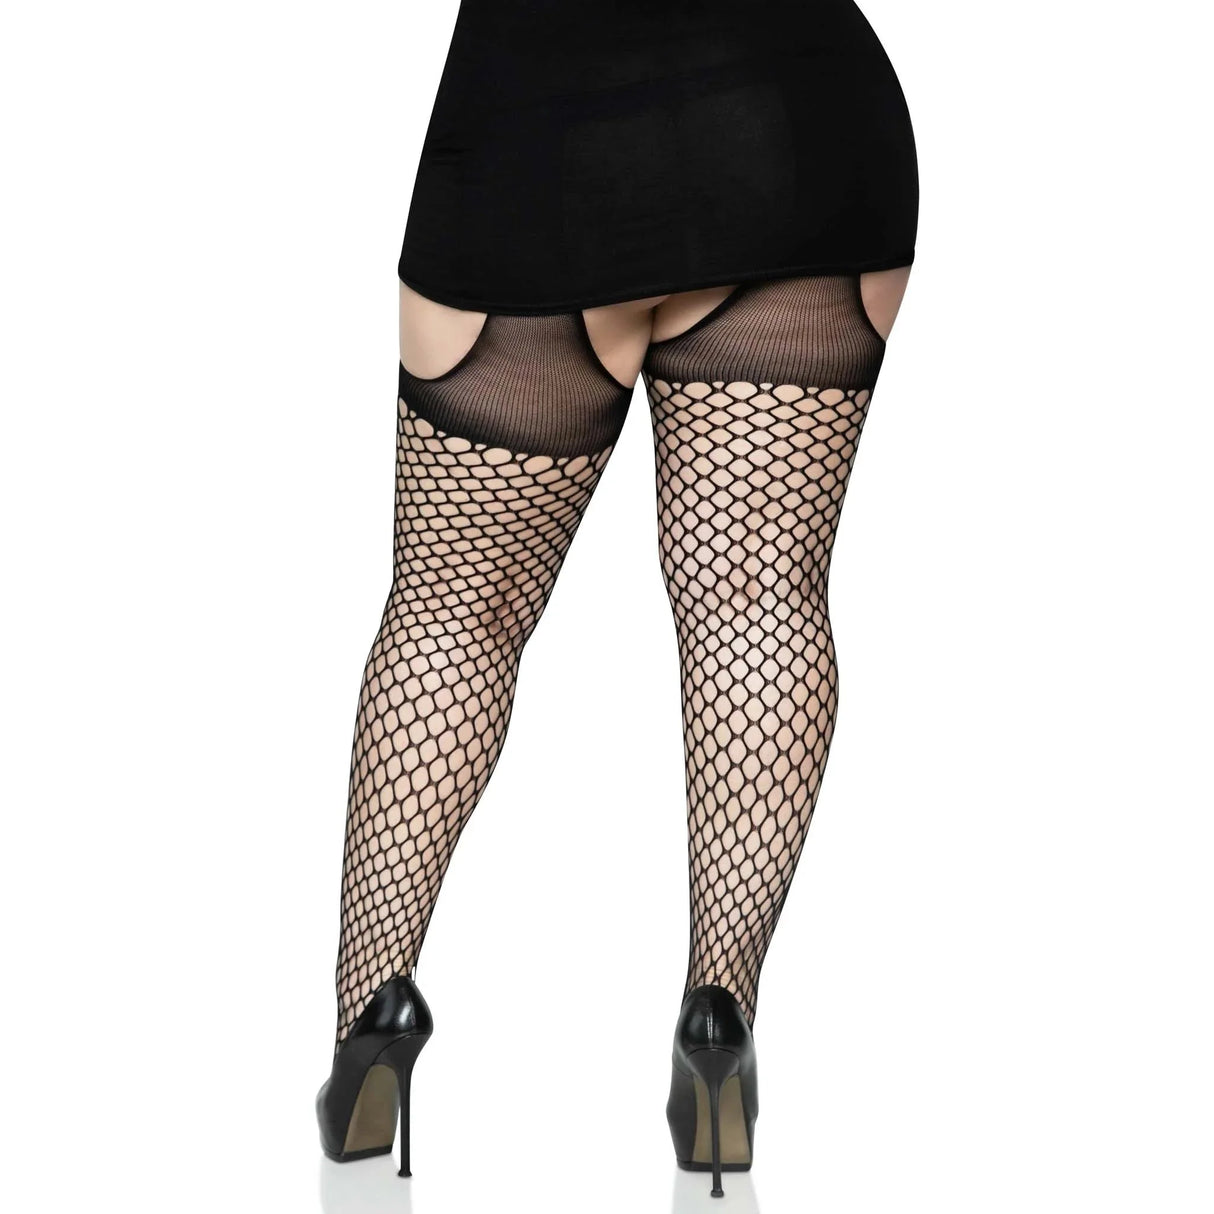 Oval Net Suspender Hose with Opaque Top